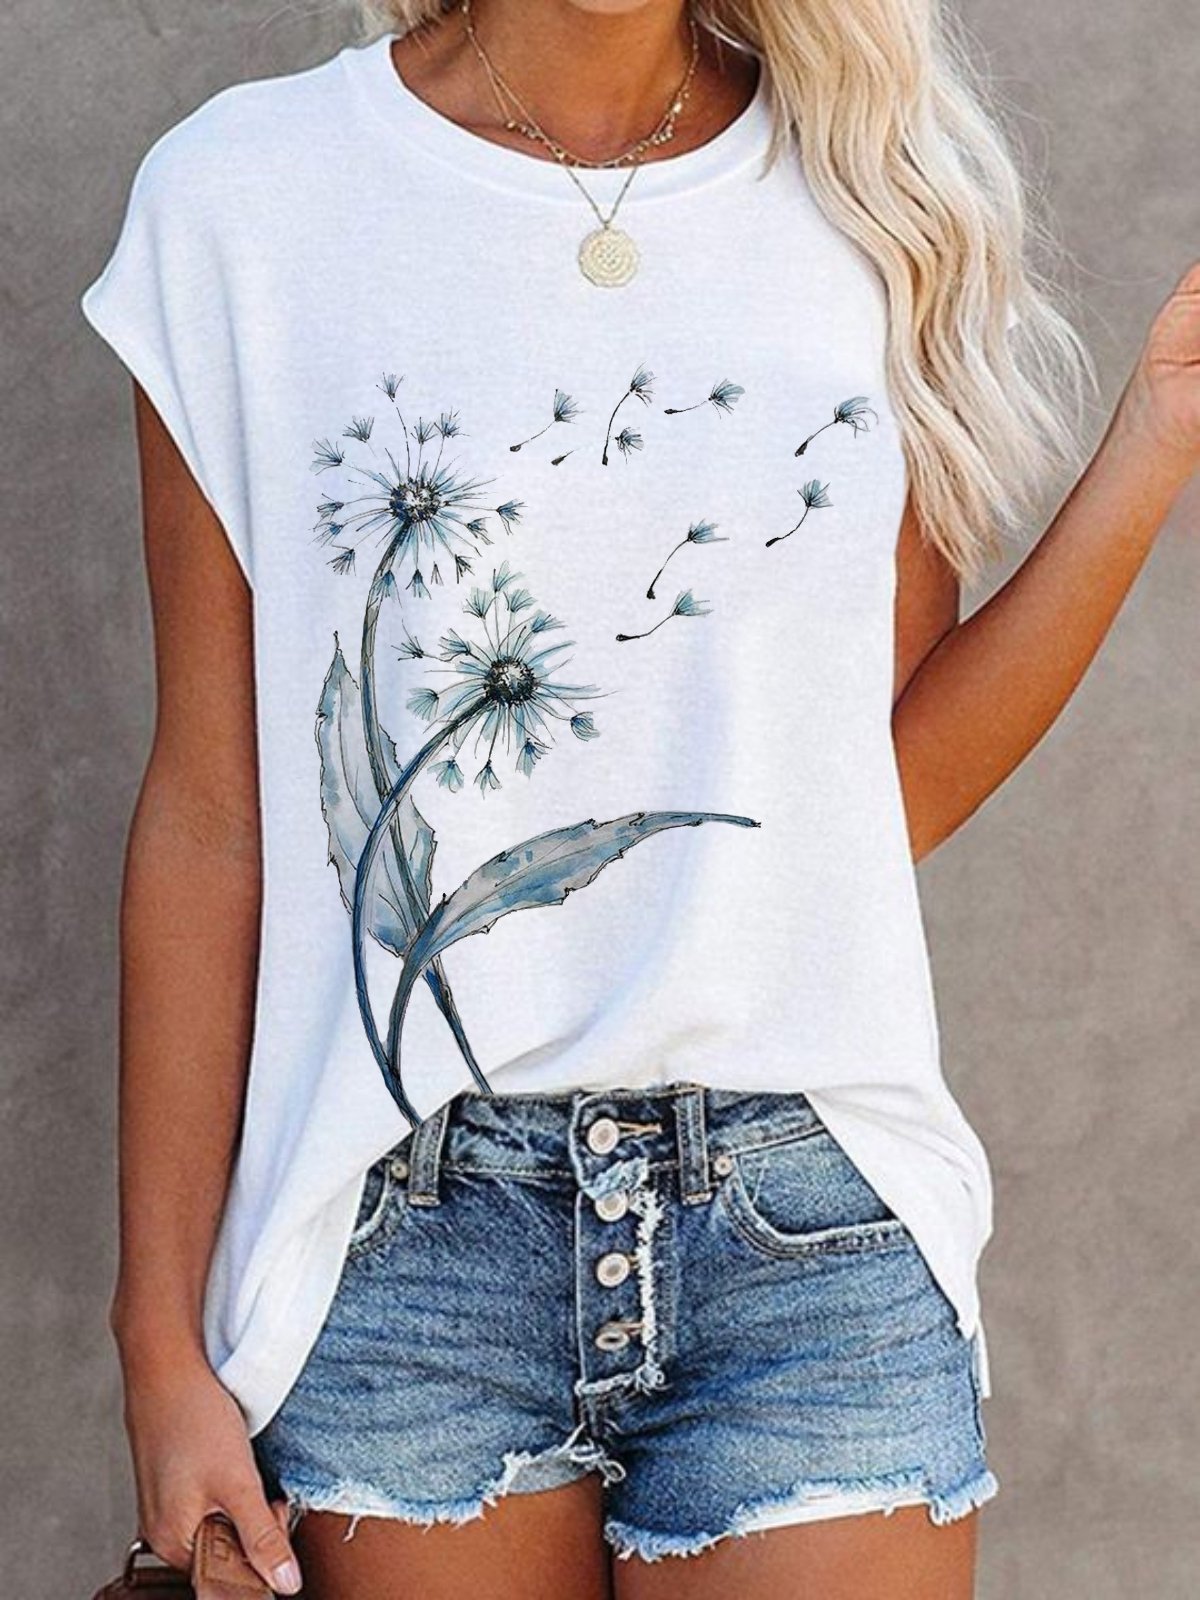 Casual Dandelion Printed Short Sleeve Round Neck Top Tunic T-Shirt ...